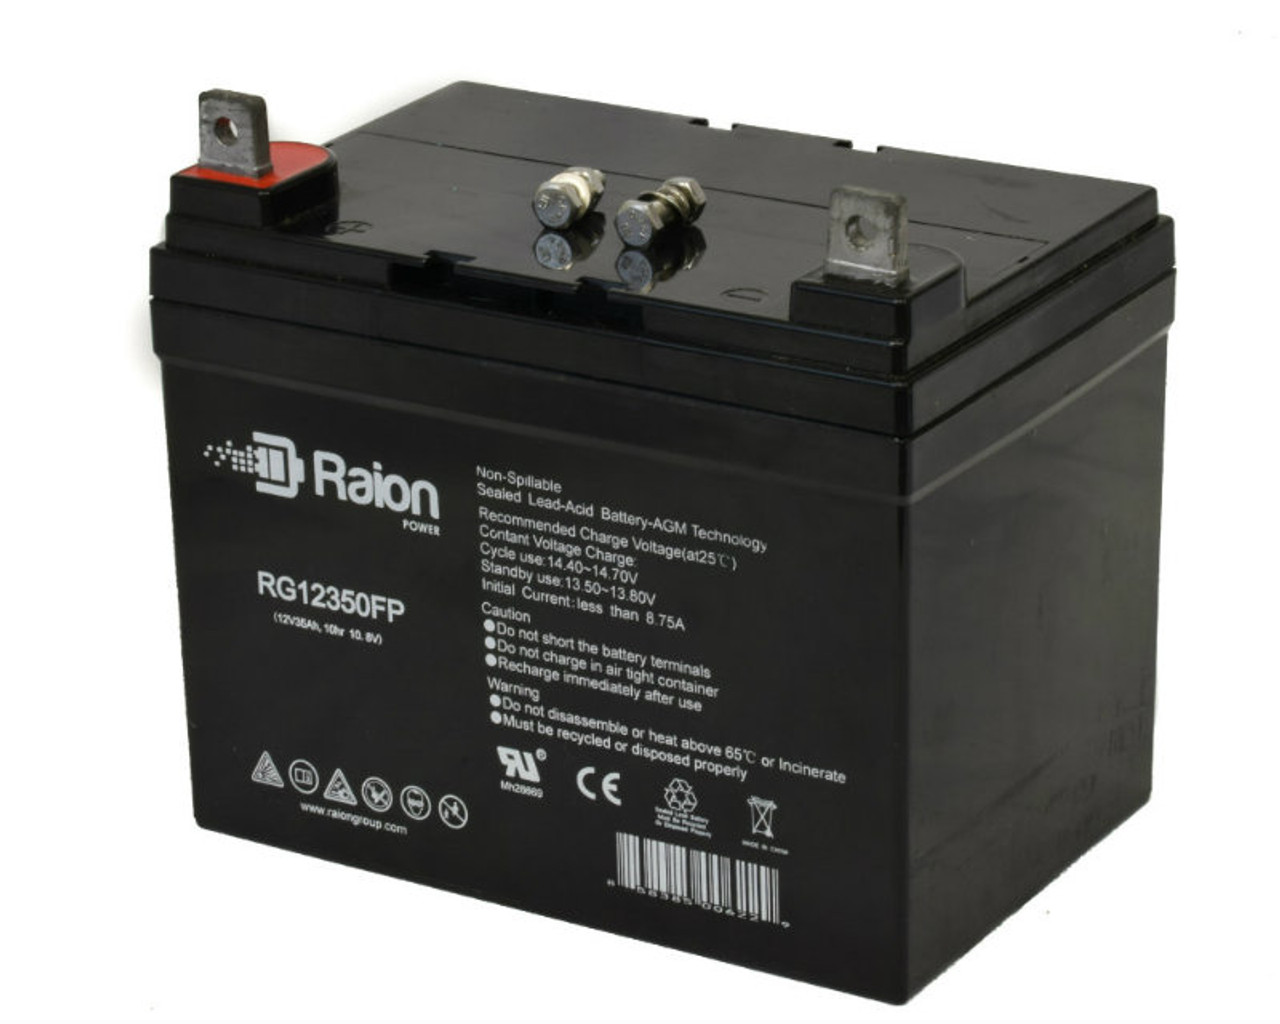 Raion Power Replacement 12V 35Ah Battery for Cub Cadet HDS2185 - 1 Pack